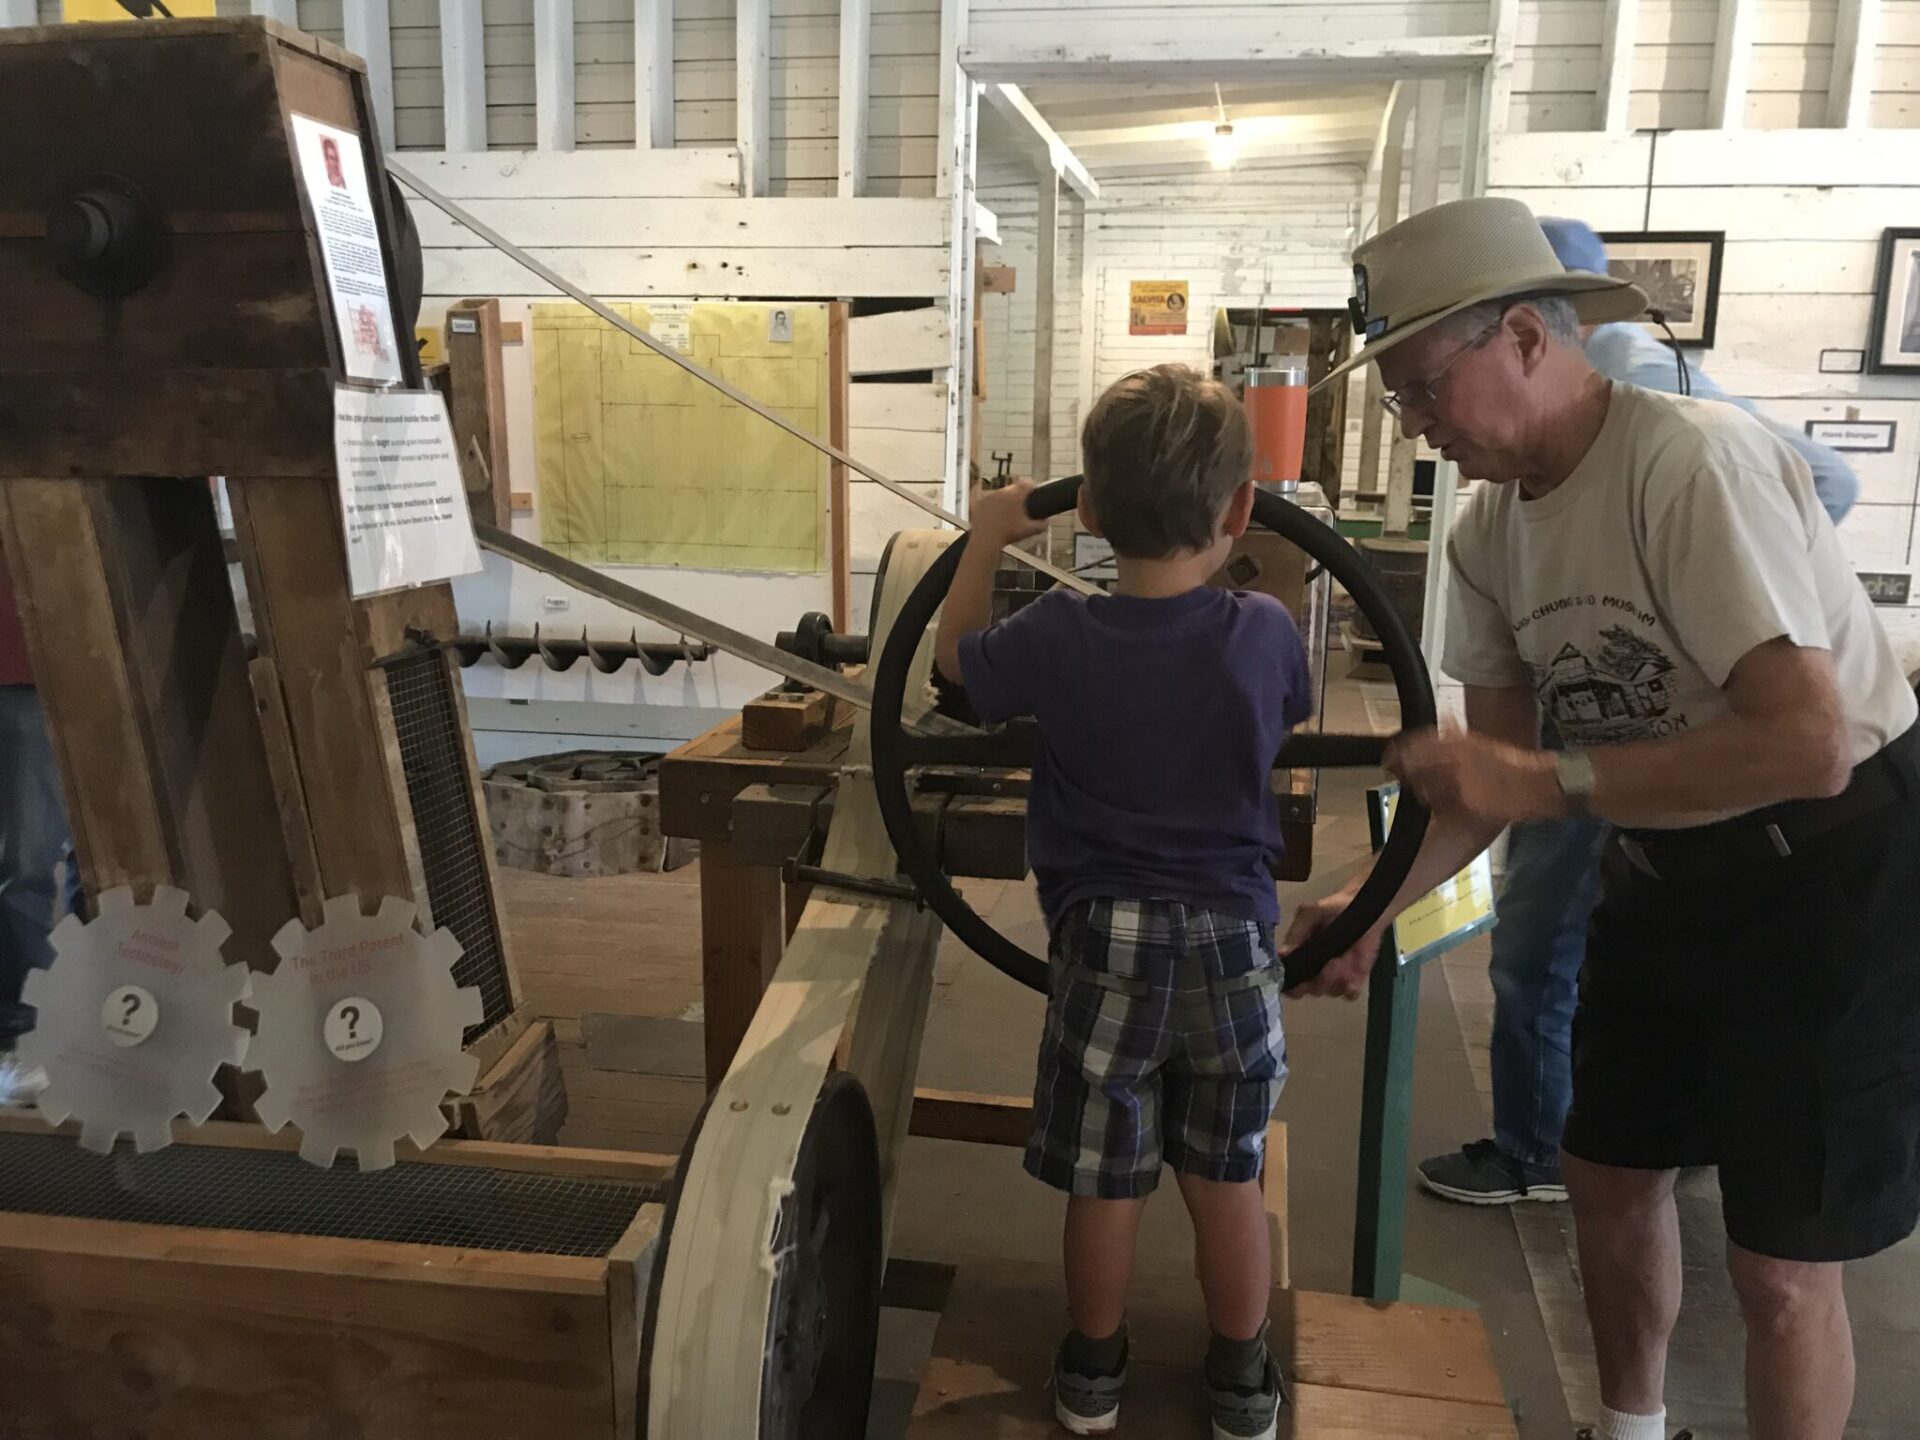 A docent helps my son turn the wheel of an auger.  